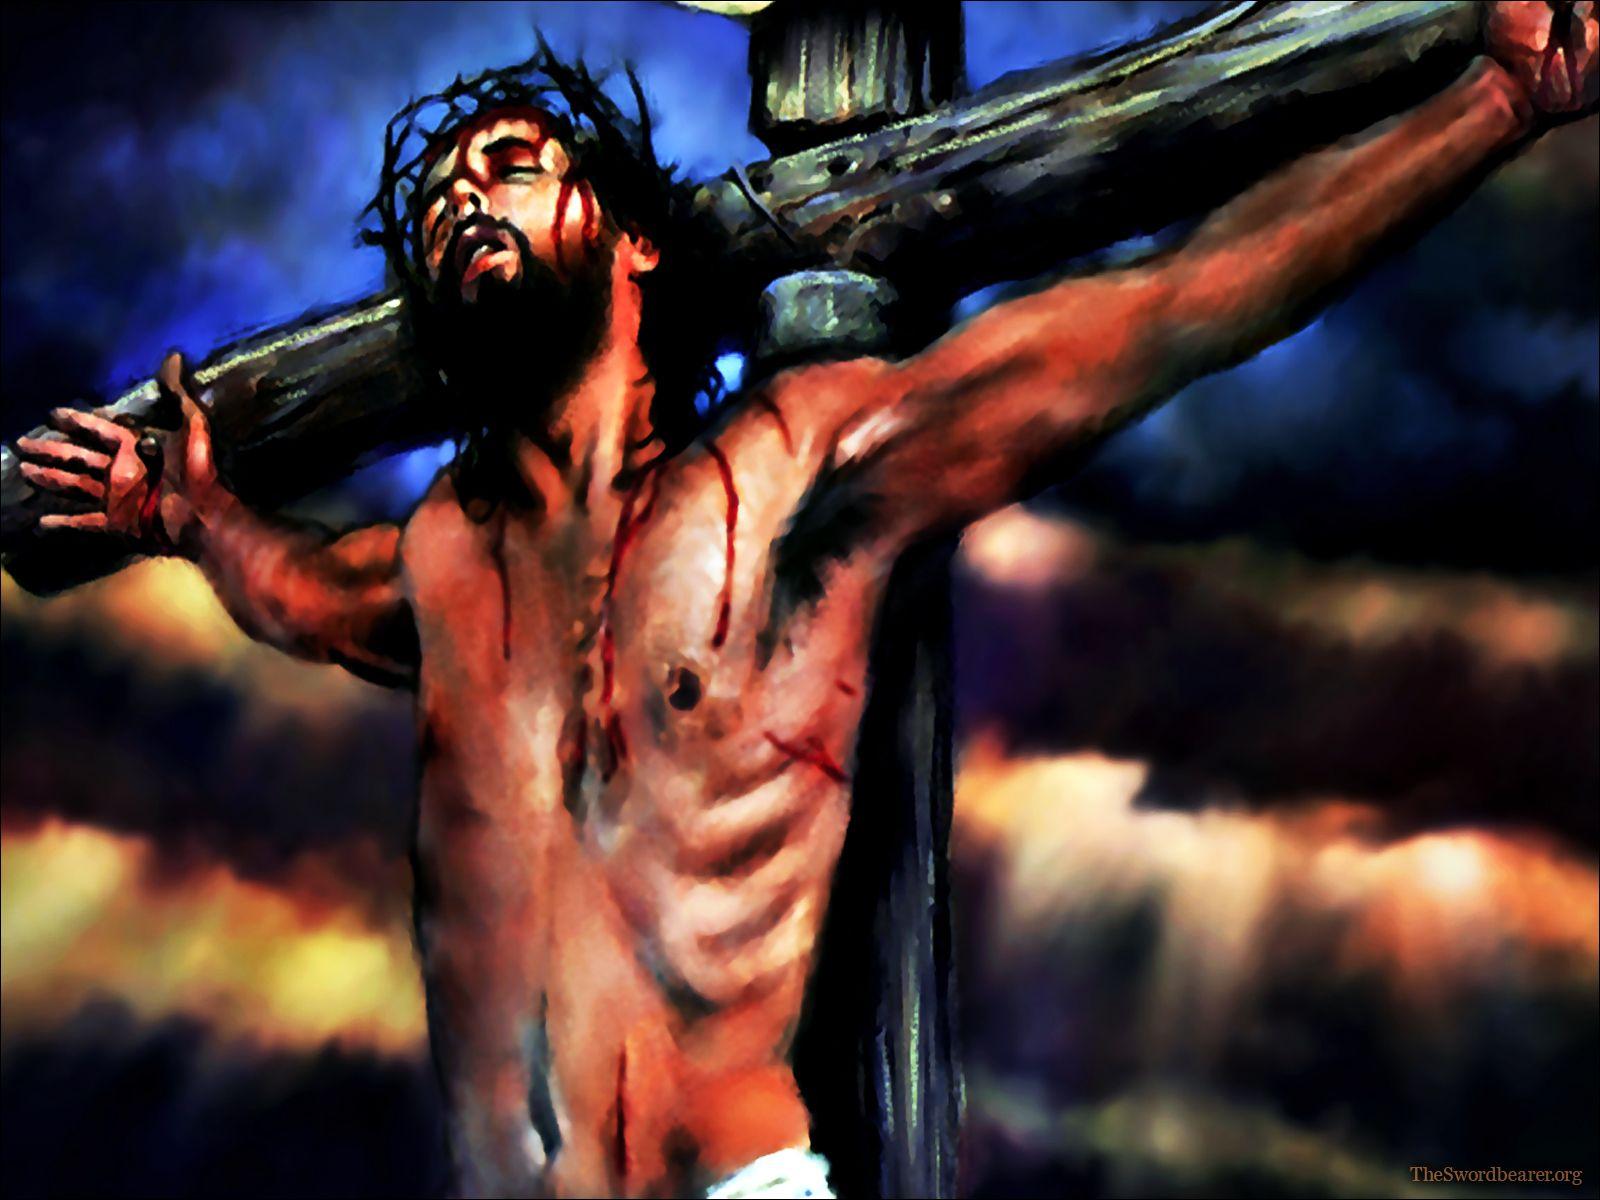 Wallpaper: The crucifixion